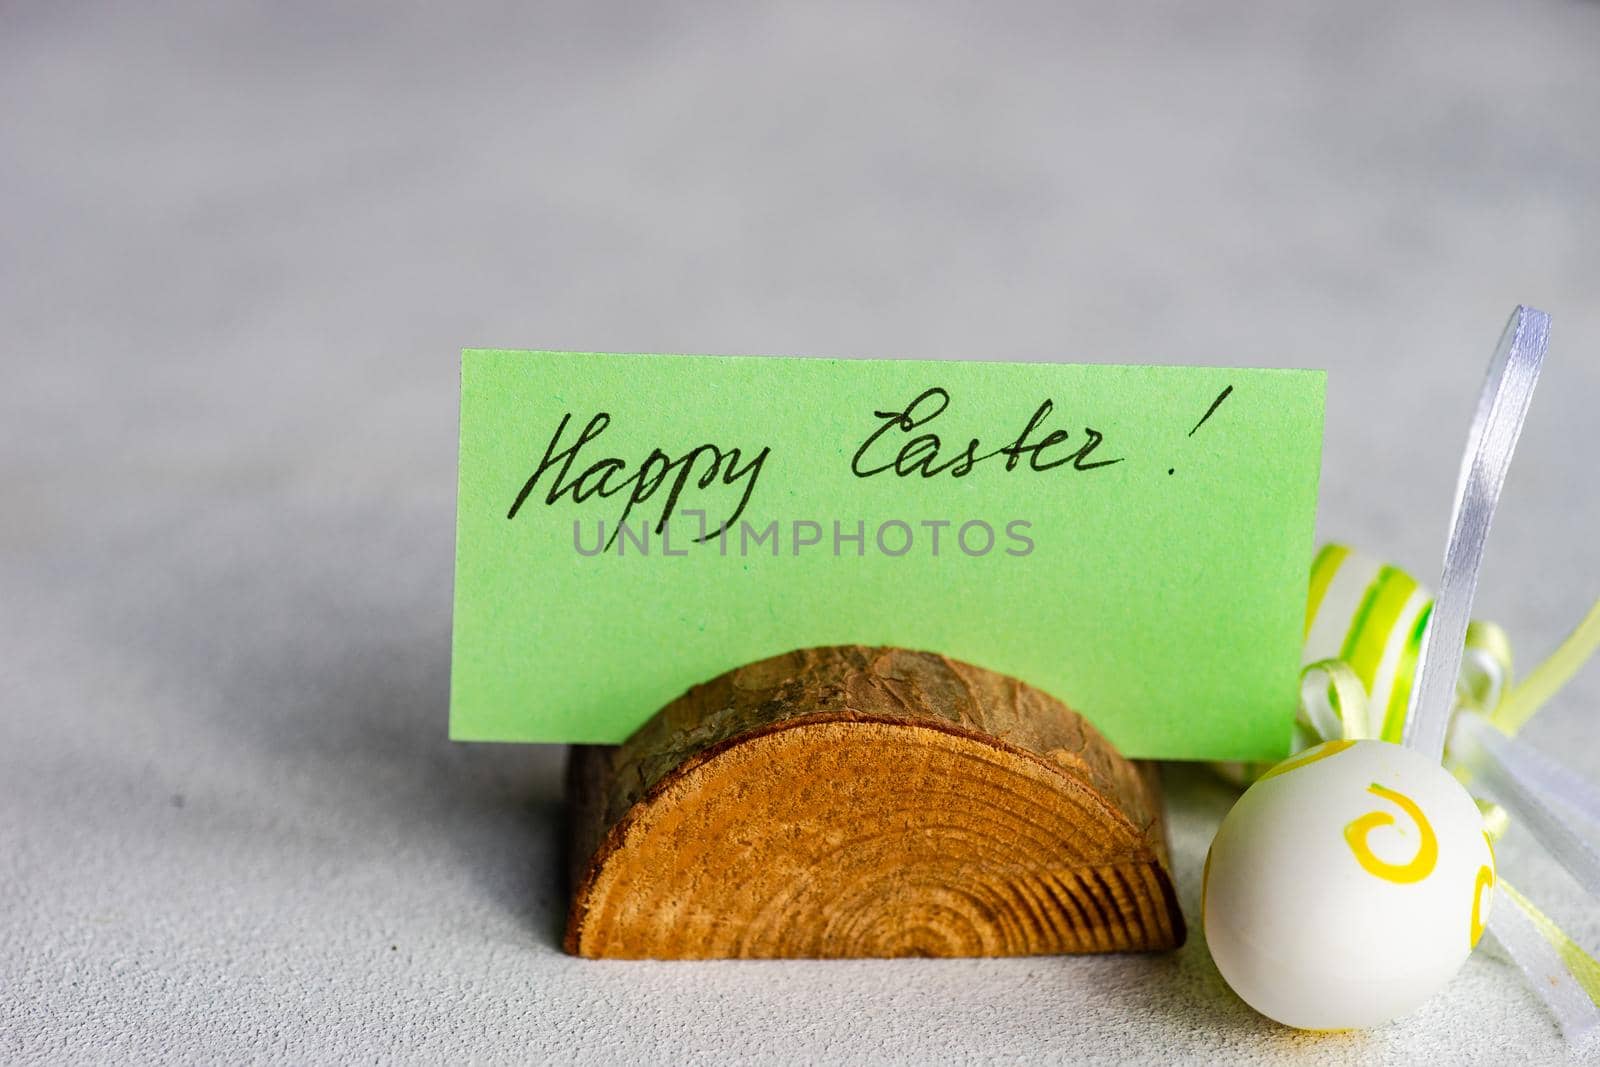 Happy Easter card and colored eggs on concrete background